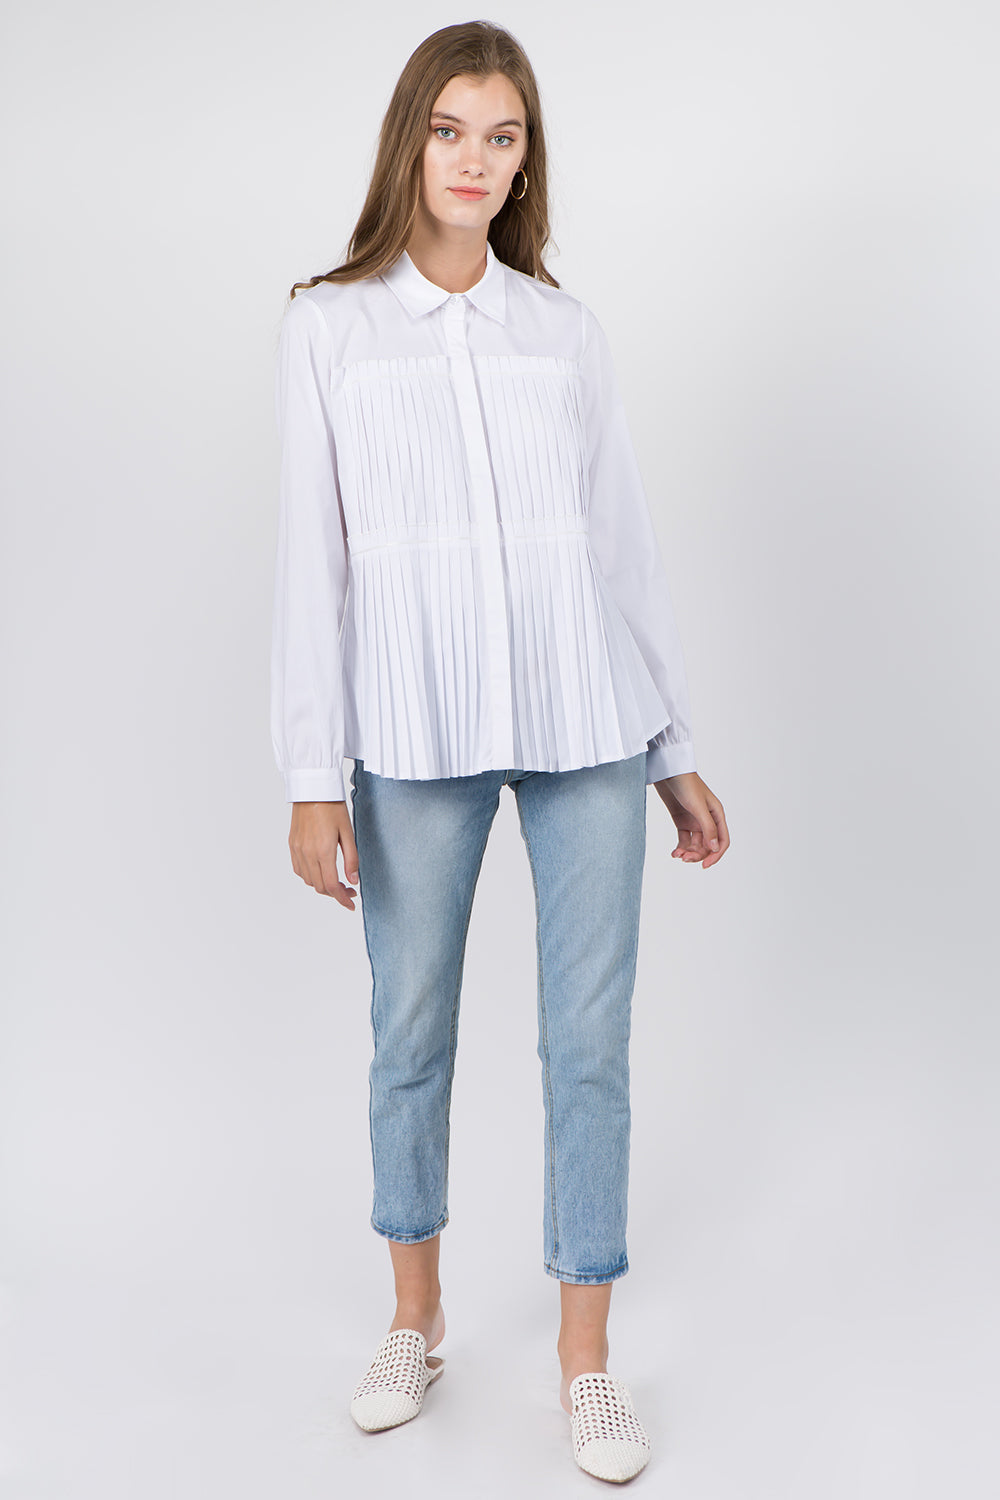 Pleat Detailed Button Up Blouse - Whiteroom+Cactus